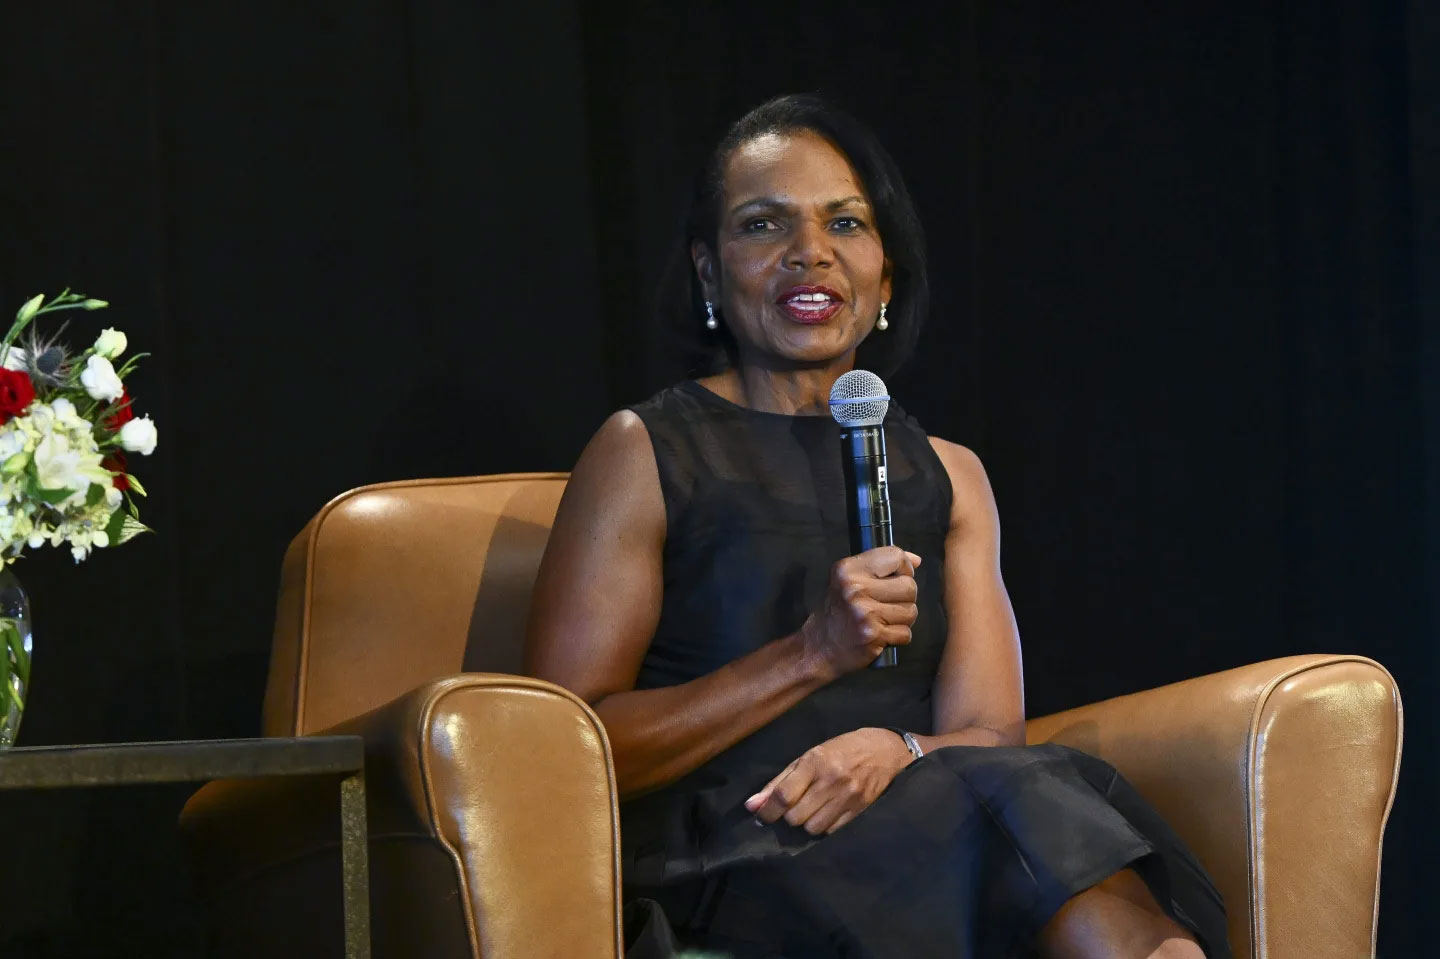 Condoleezza Rice, who holds 3 degrees, says America needs to ‘make a lot more use’ of skills-based hiring